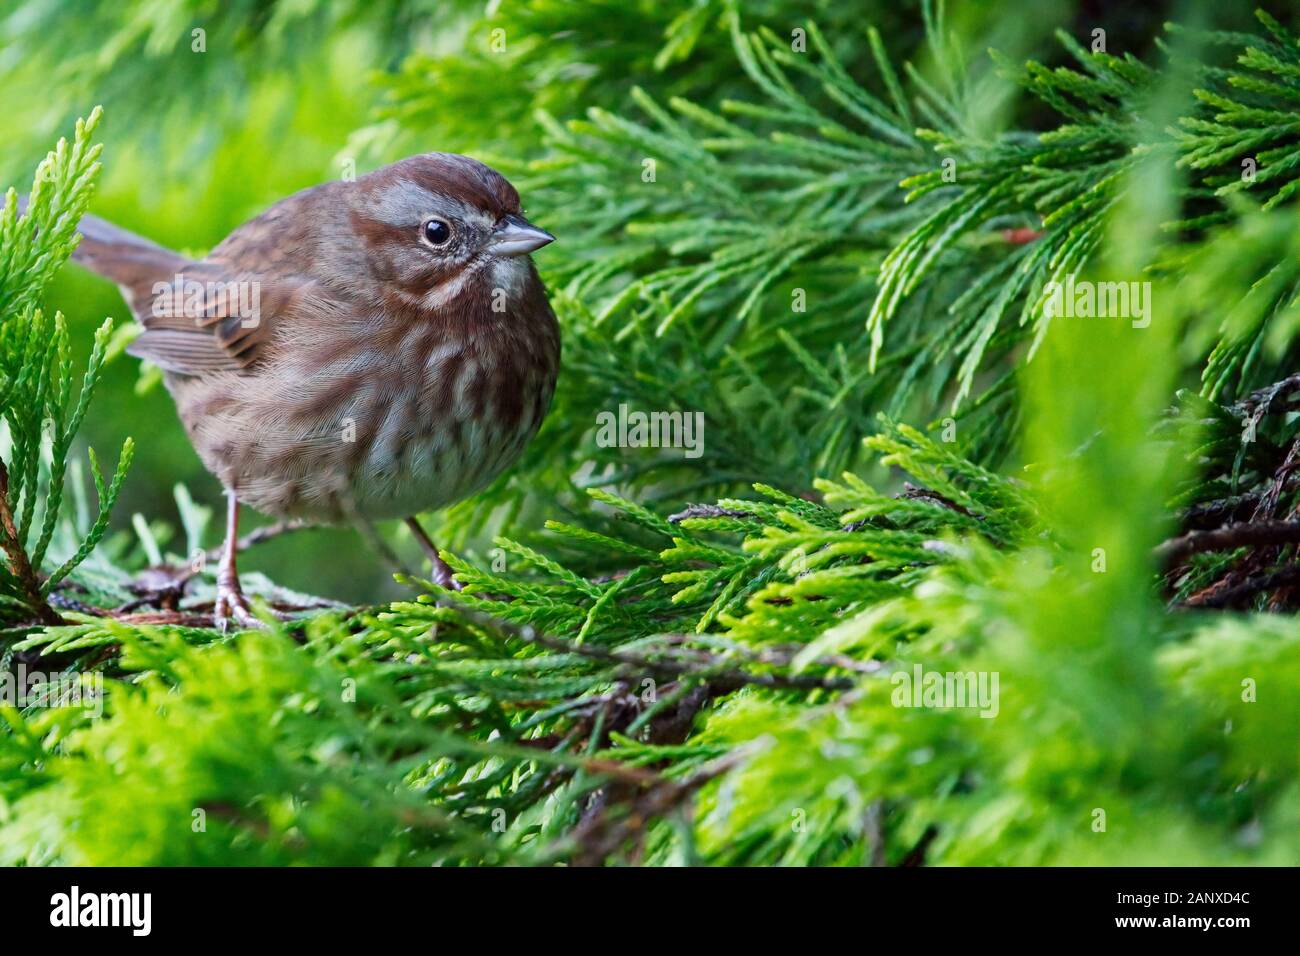 Song sparrow perched on branches of gold rider leyland cypress tree, Snohomish, Washington, USA Stock Photo